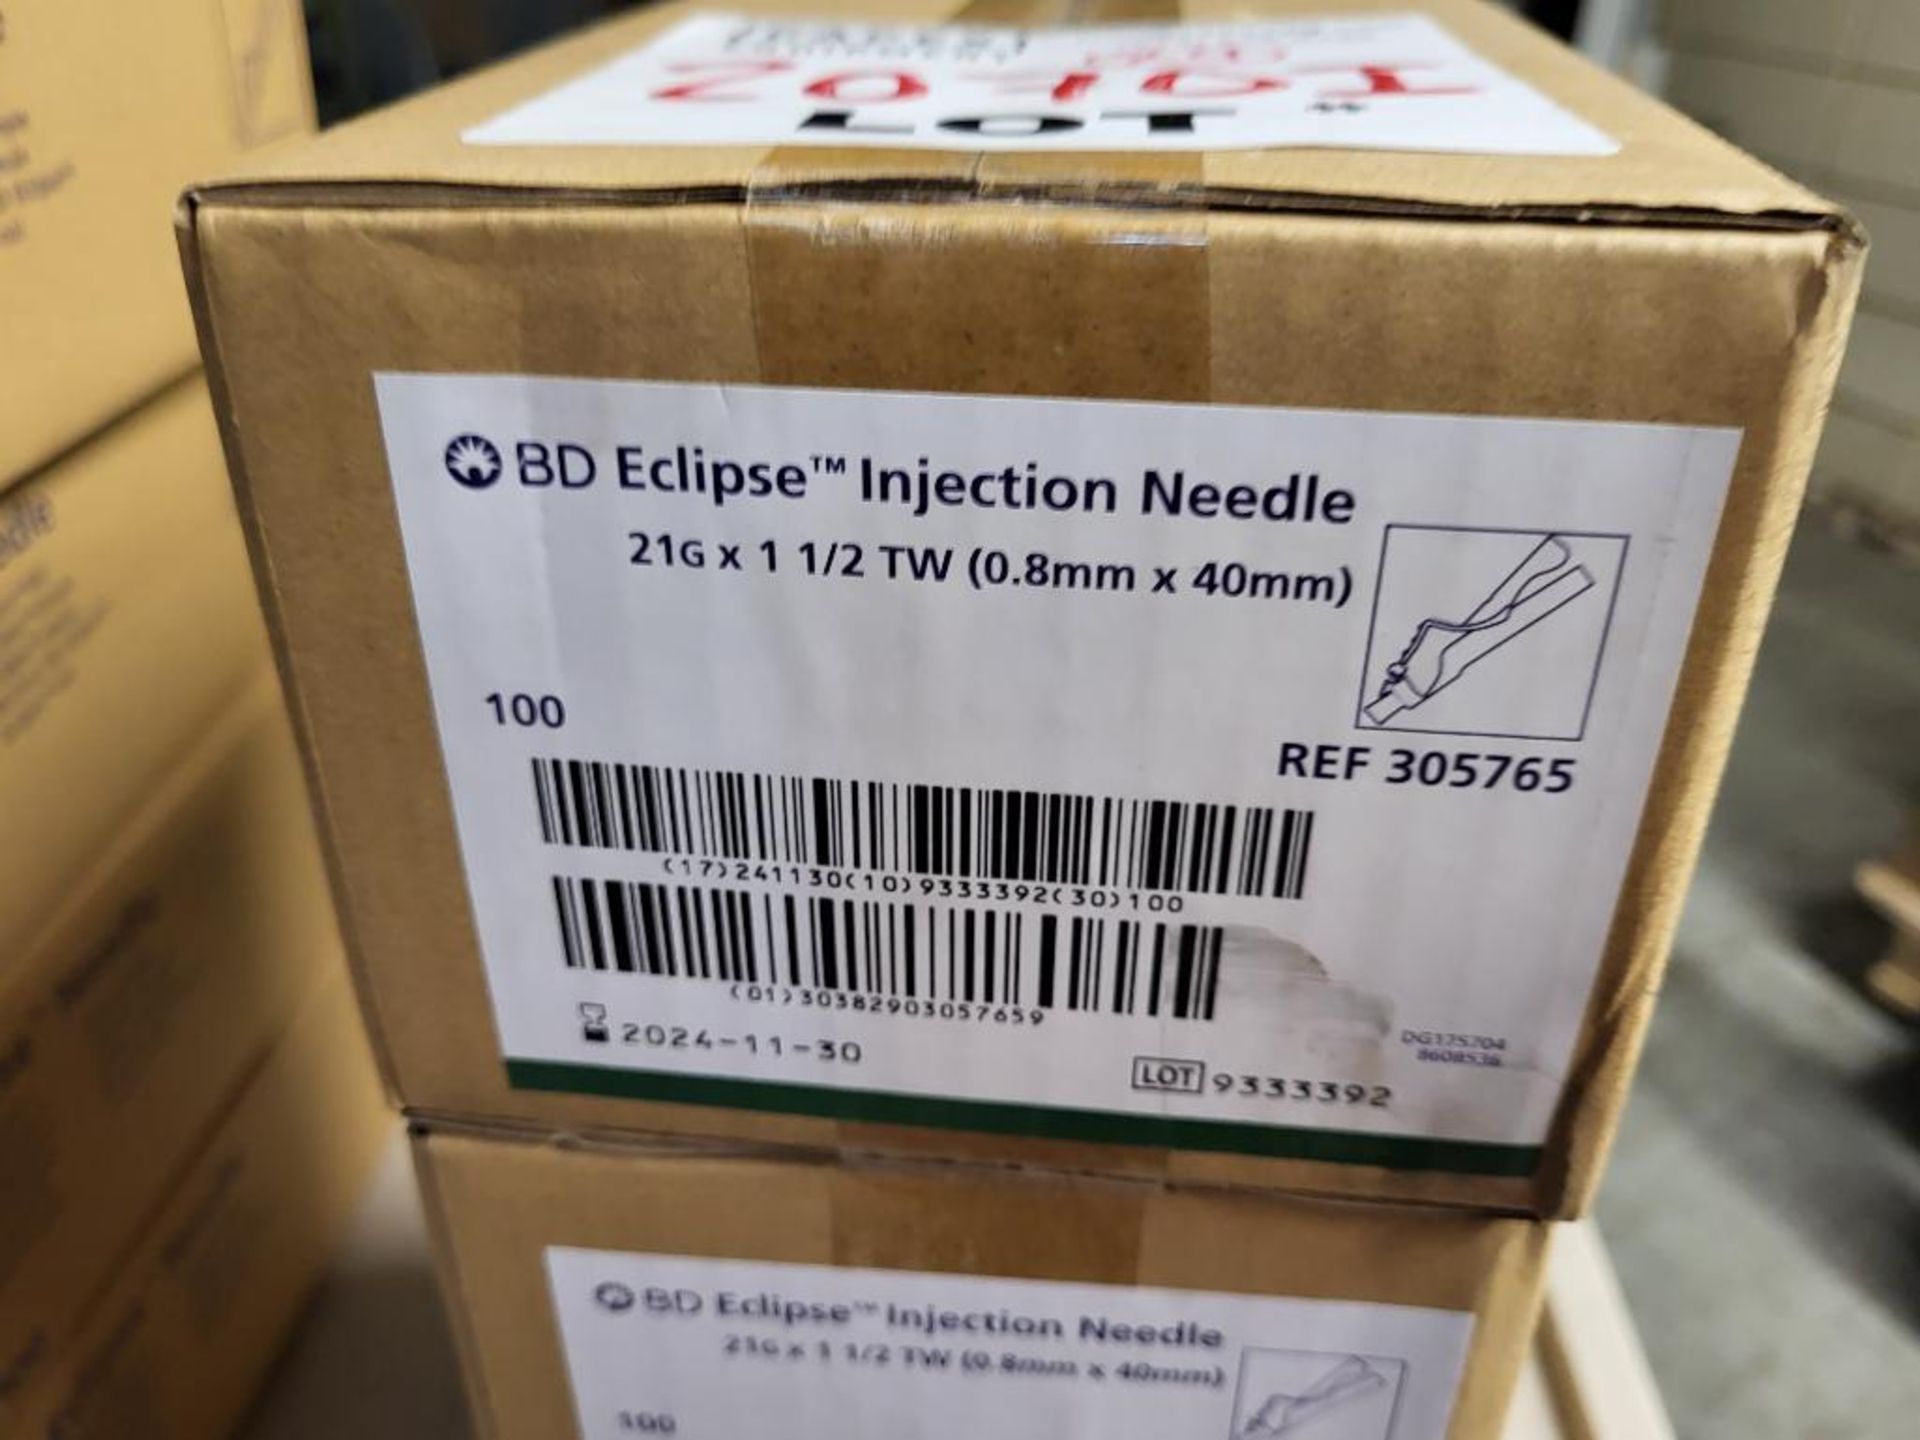 New Boxes of 100 BD Eclipse Injection Needles 21G x 1 1/2 TW